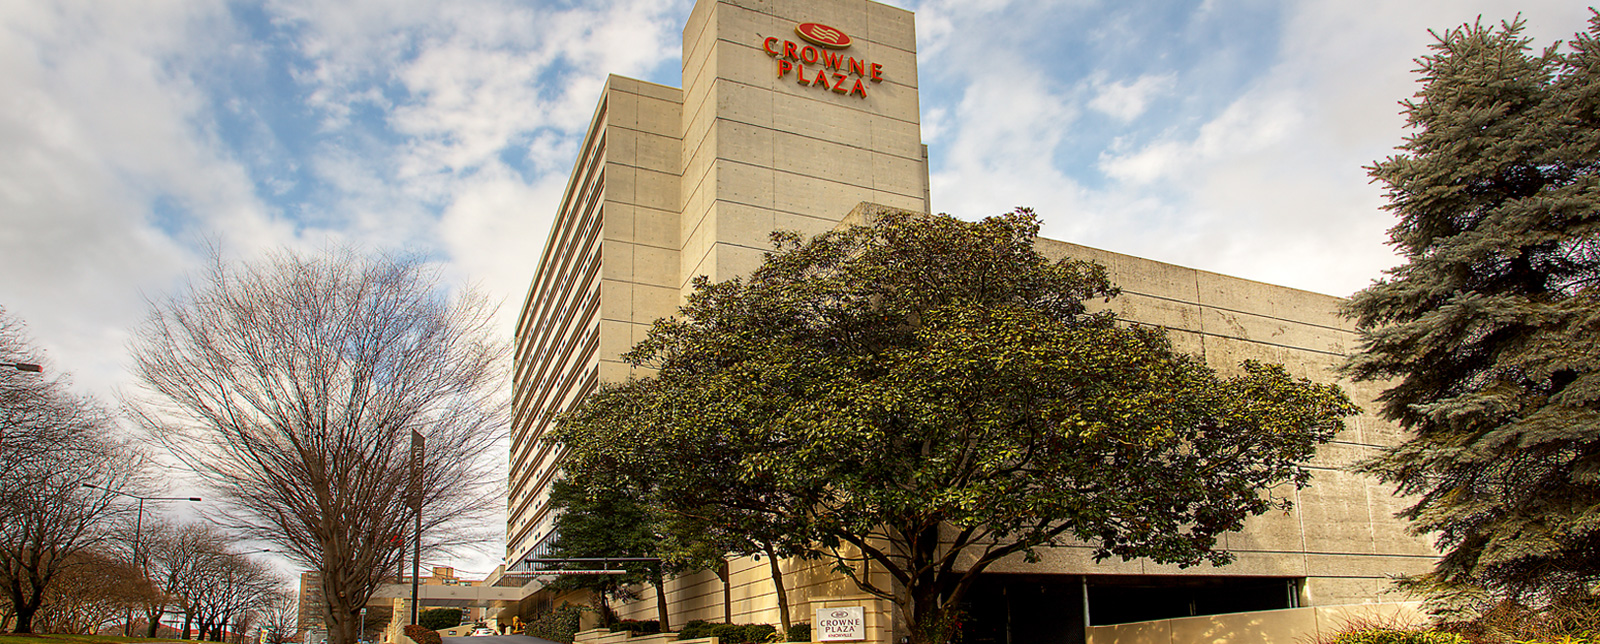 Crowne Plaza Knoxville Downtown University Hotel, Tennessee